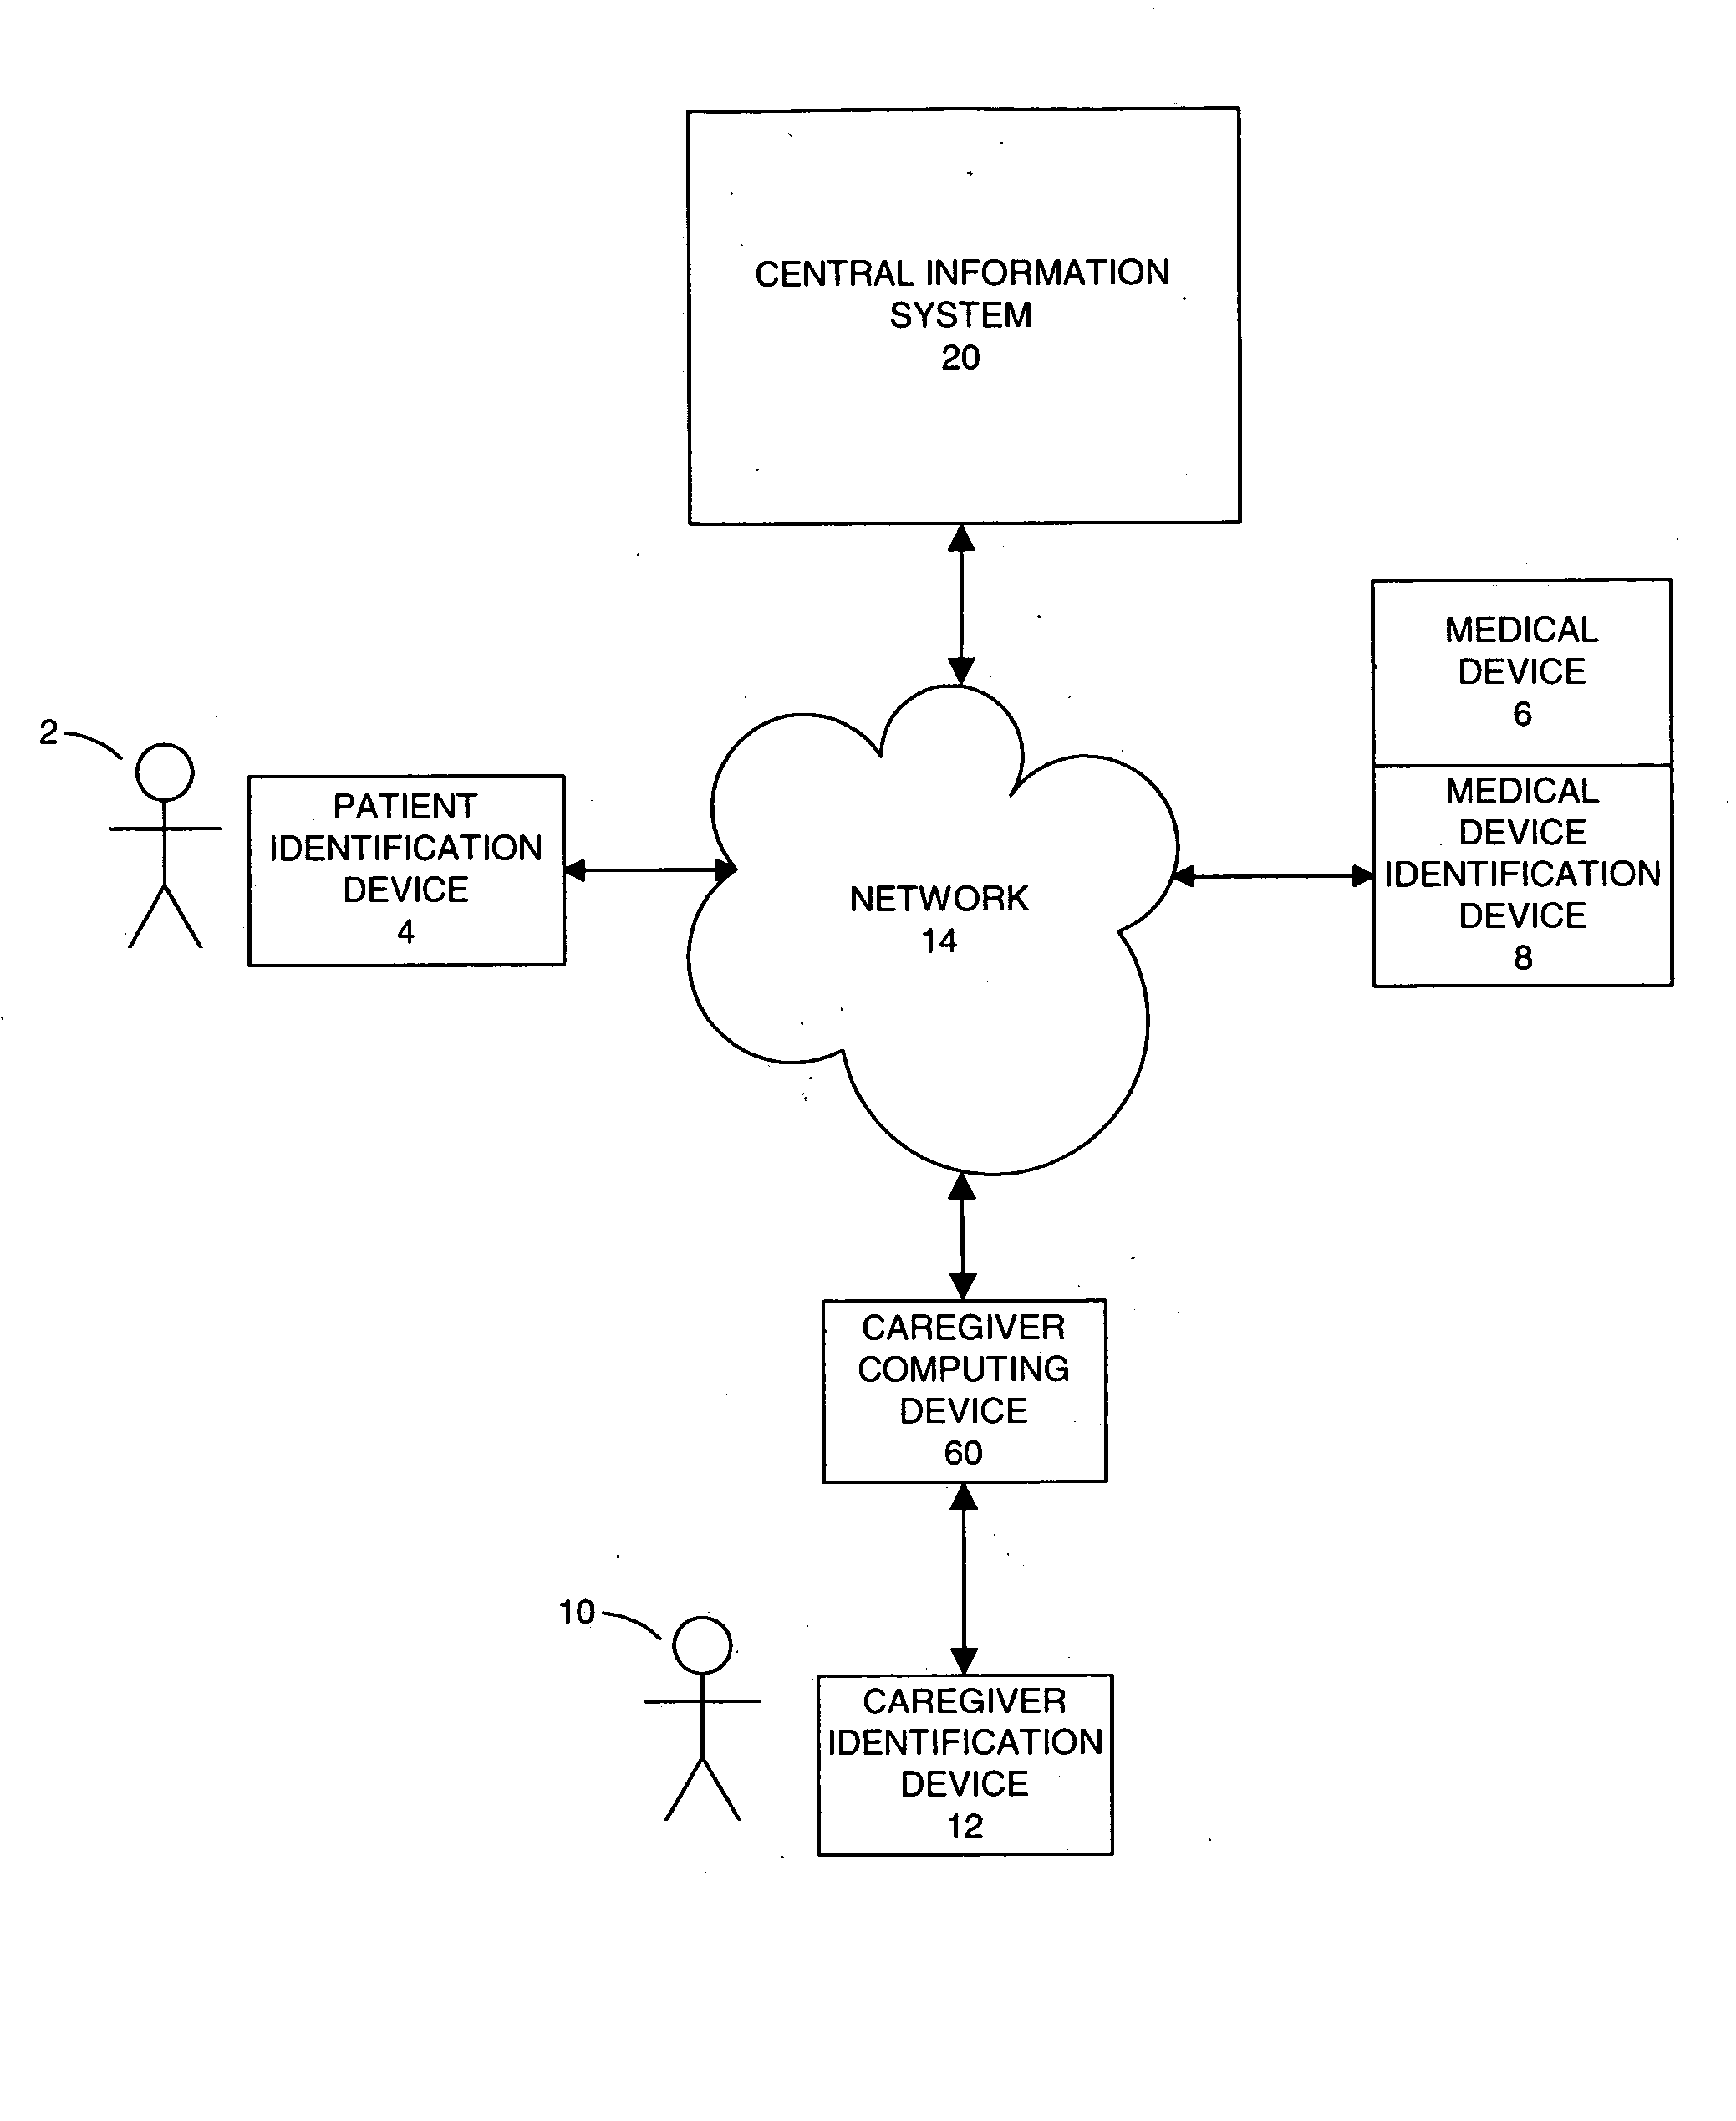 Task-based system and method for managing patient care through automated recognition